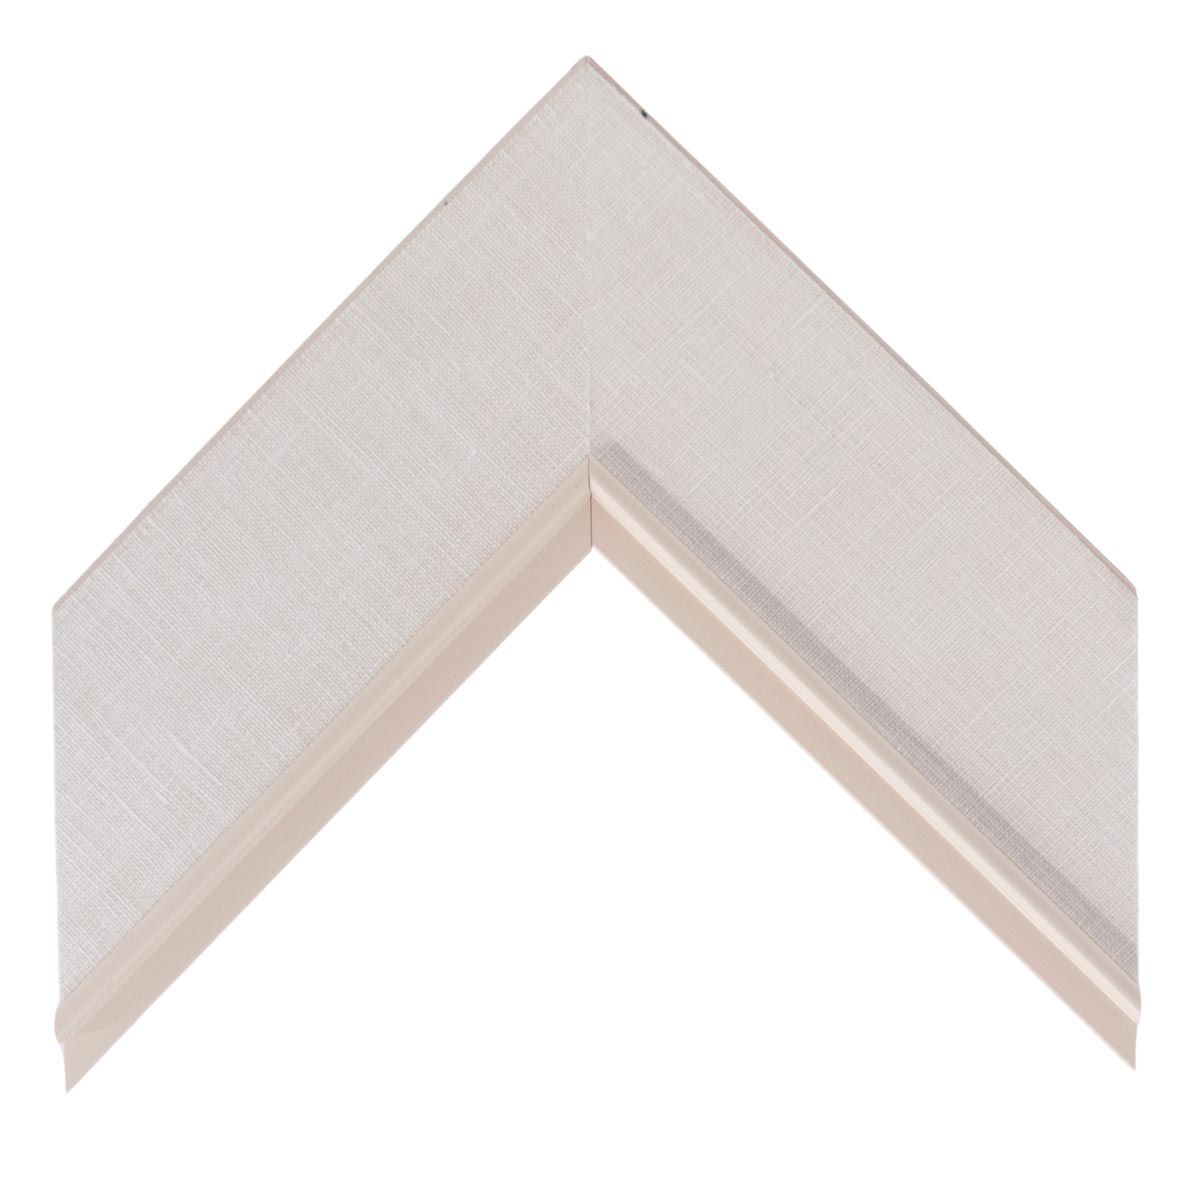 Linen Liner Moulding - Natural, White Bead ML120-2 ¾ inches, 16 x 20 inches